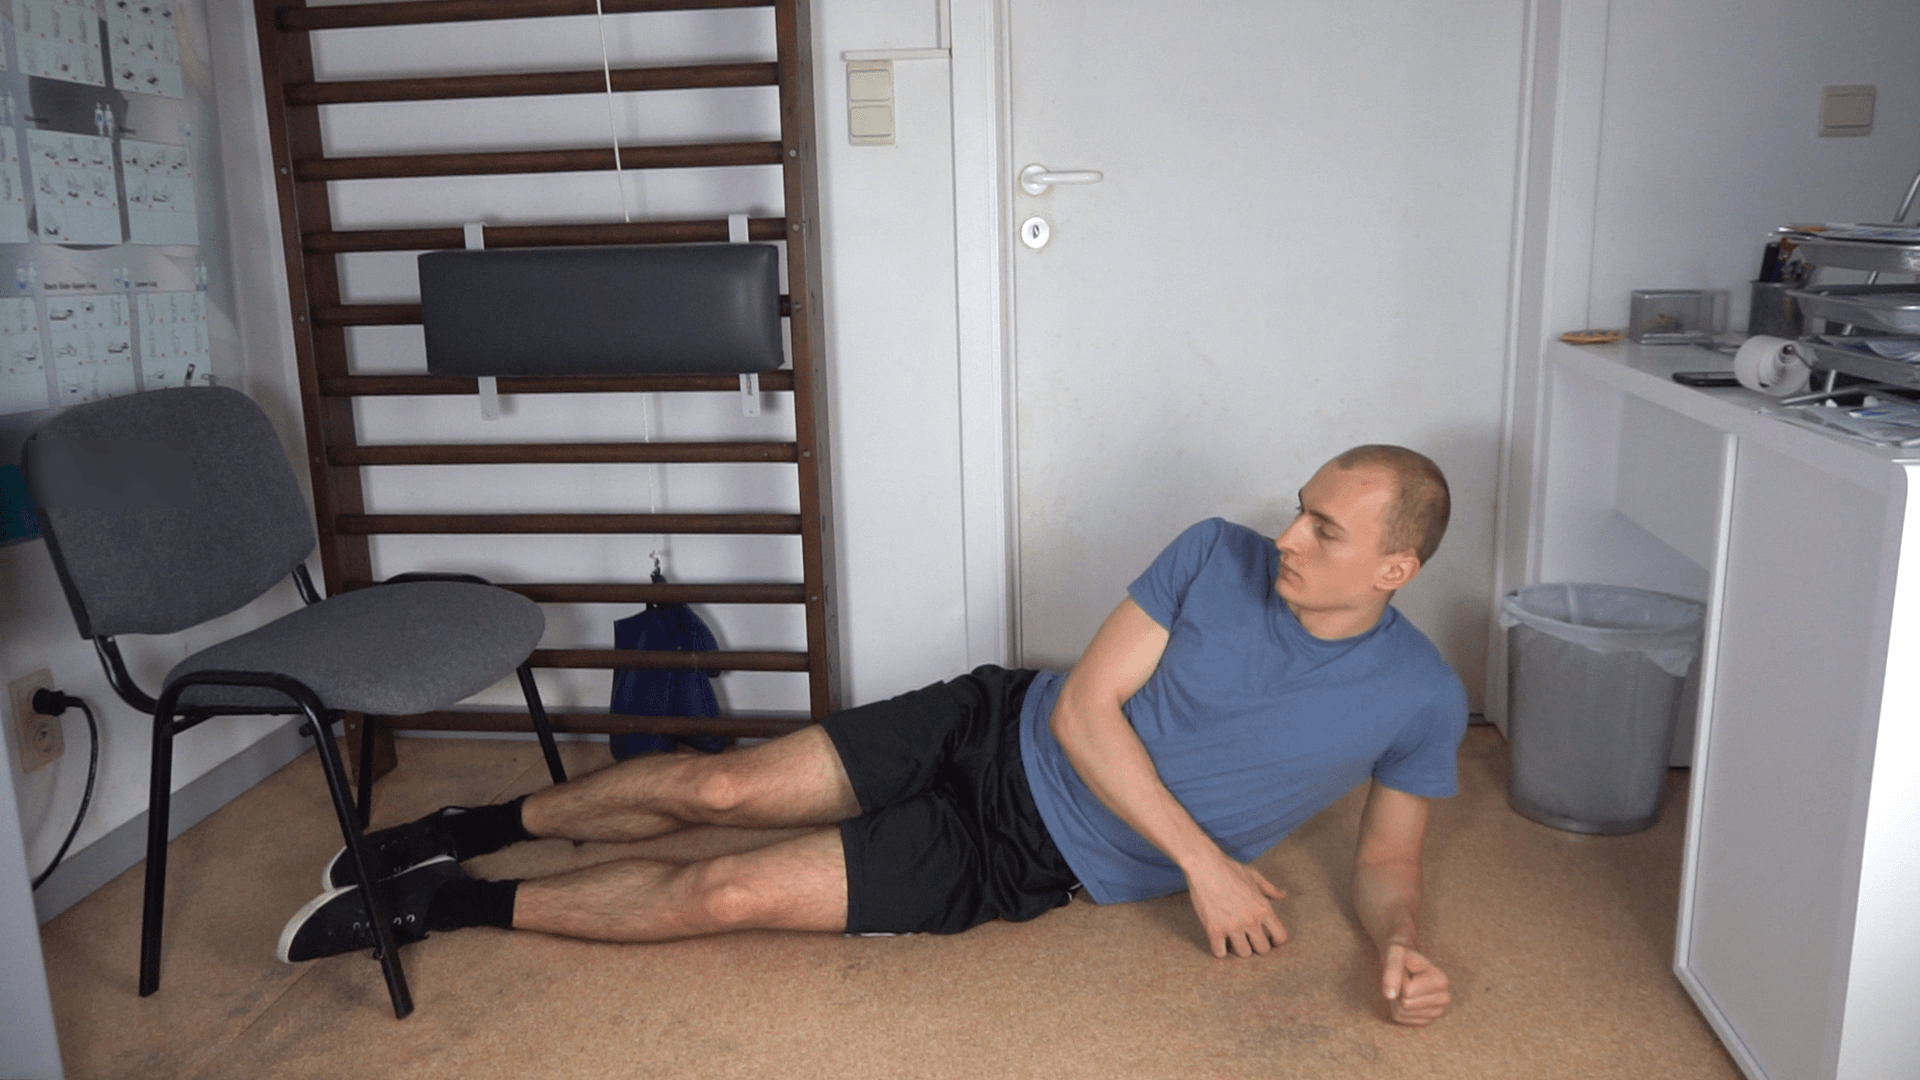 How to do a feet elevated side plank